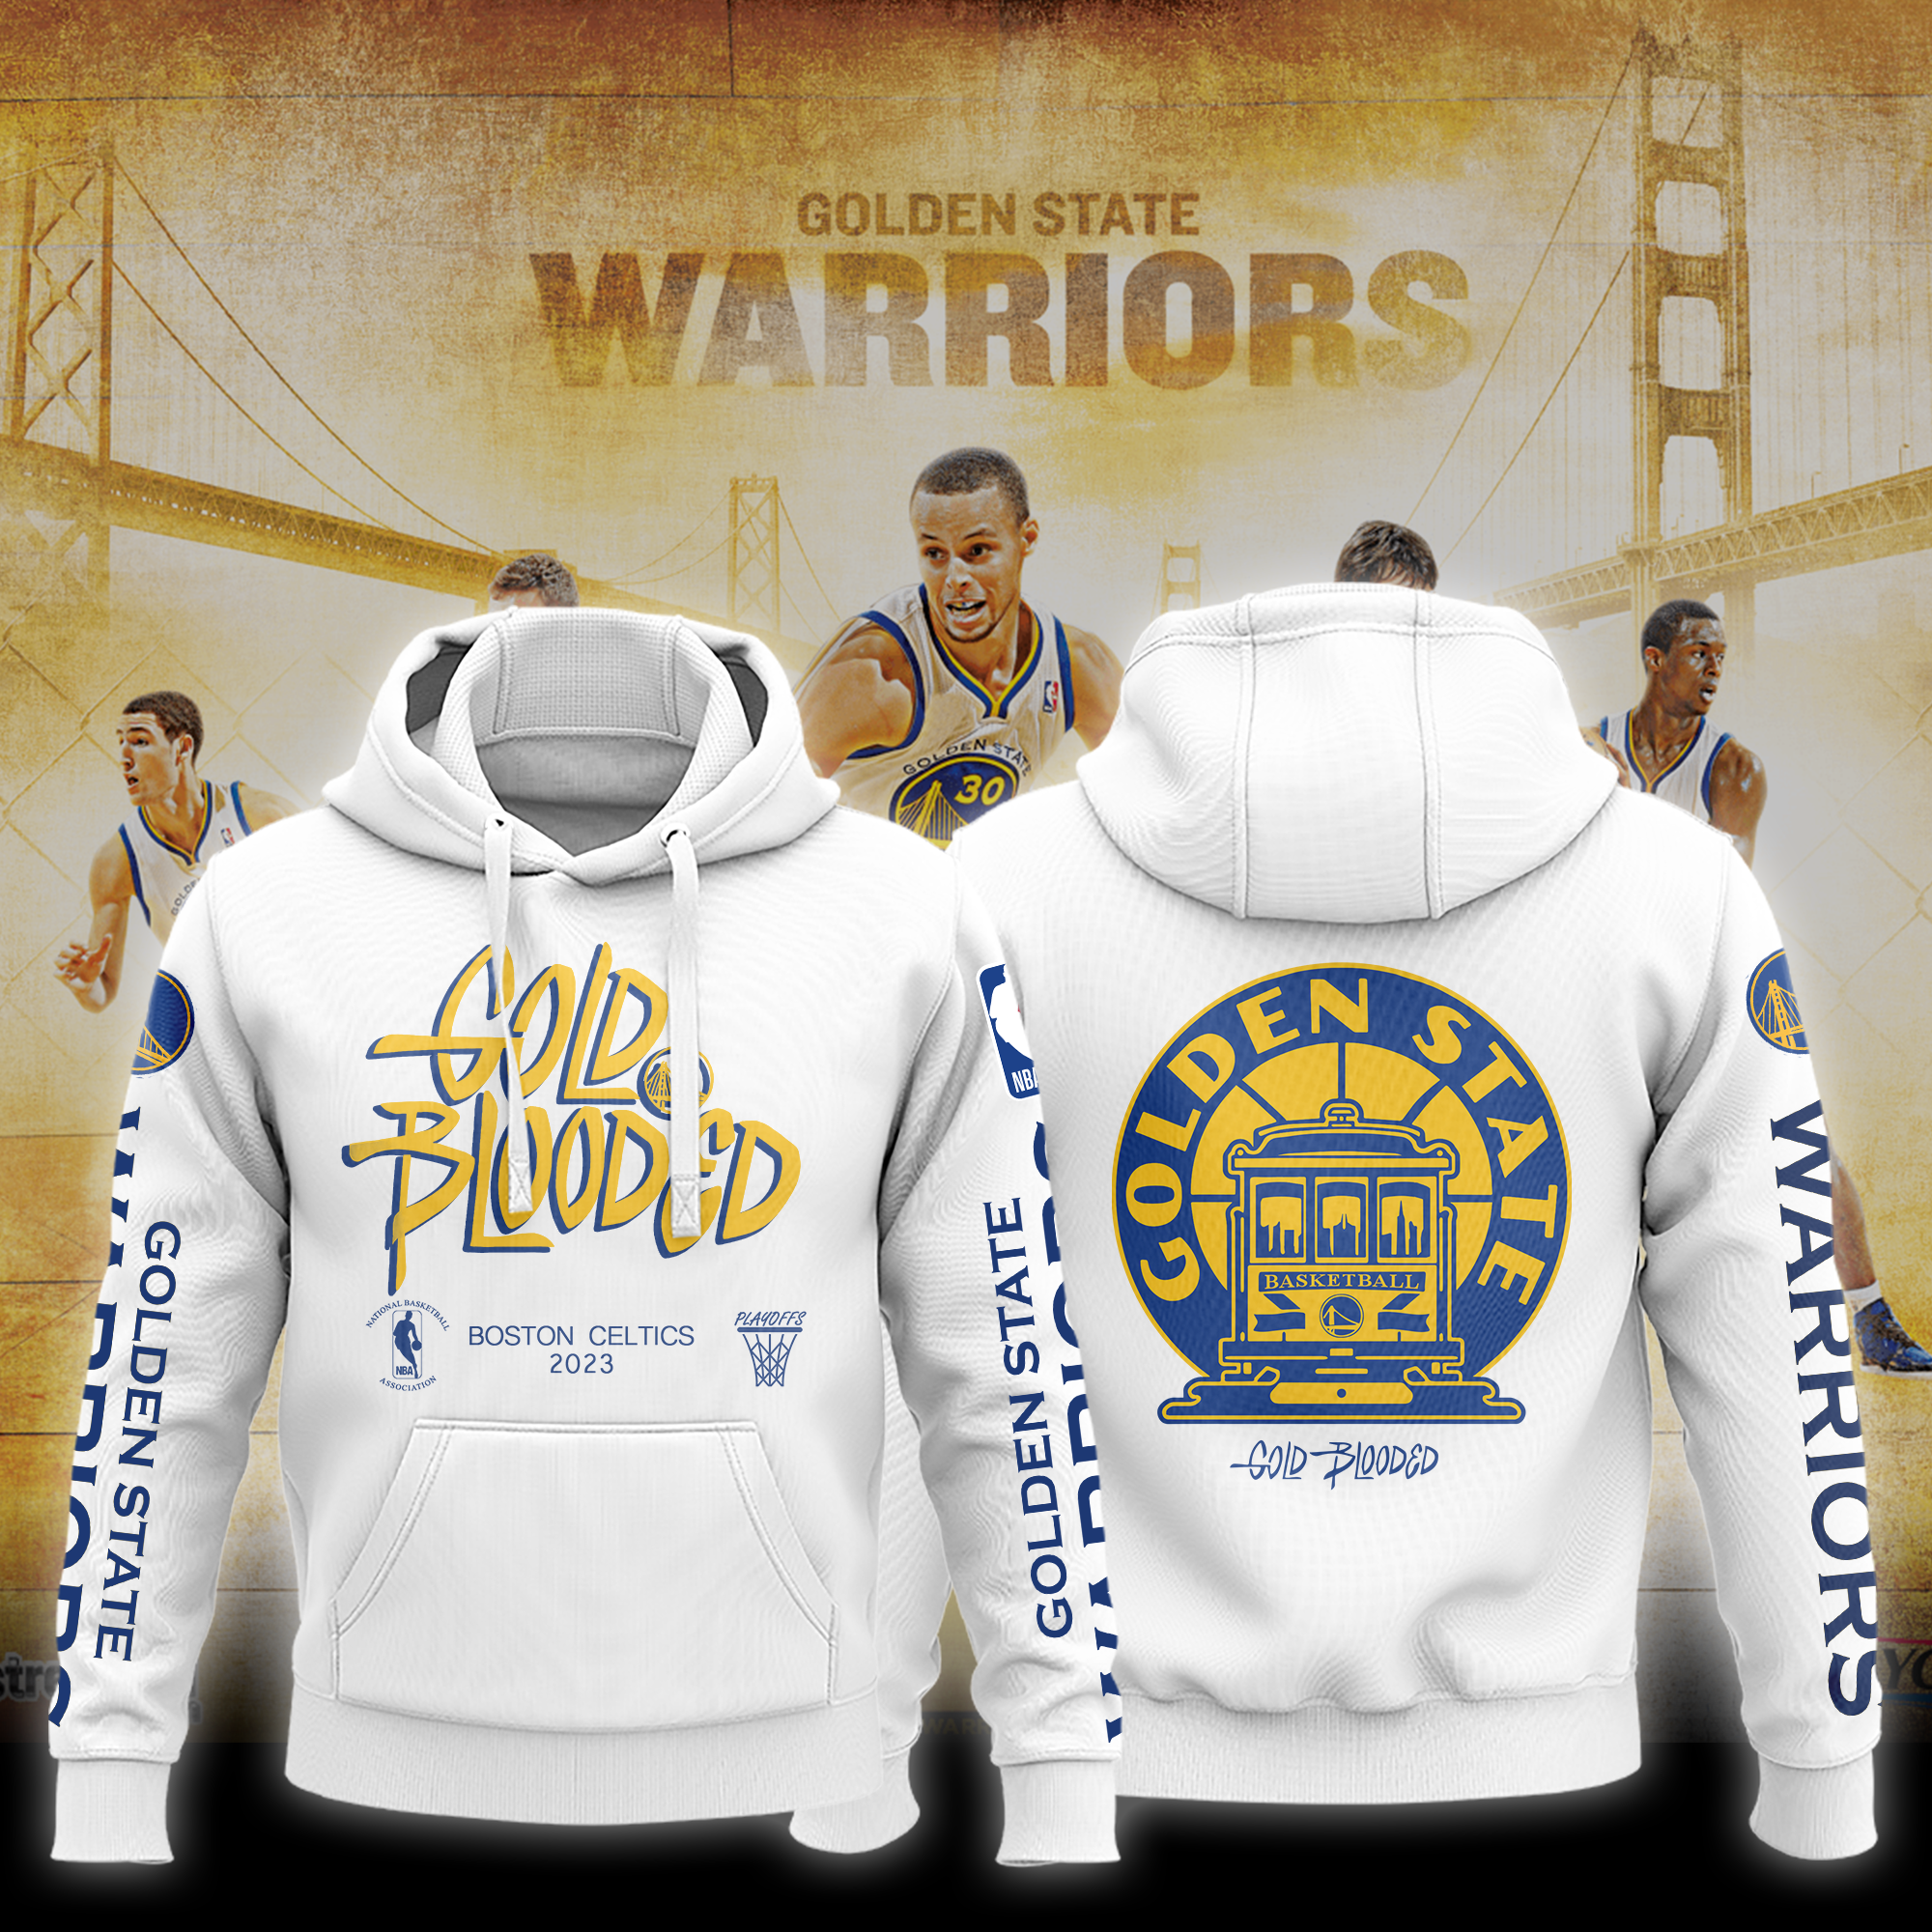 Super Hot Fashion on X: Personalized Name Golden State Warriors 2022 Gold  Blooded Champions 3D Shirt Link to buy:   #Personalized #NBA #GoldenStateWarriors #GoldBlooded #Champions #3D #Shirt   / X